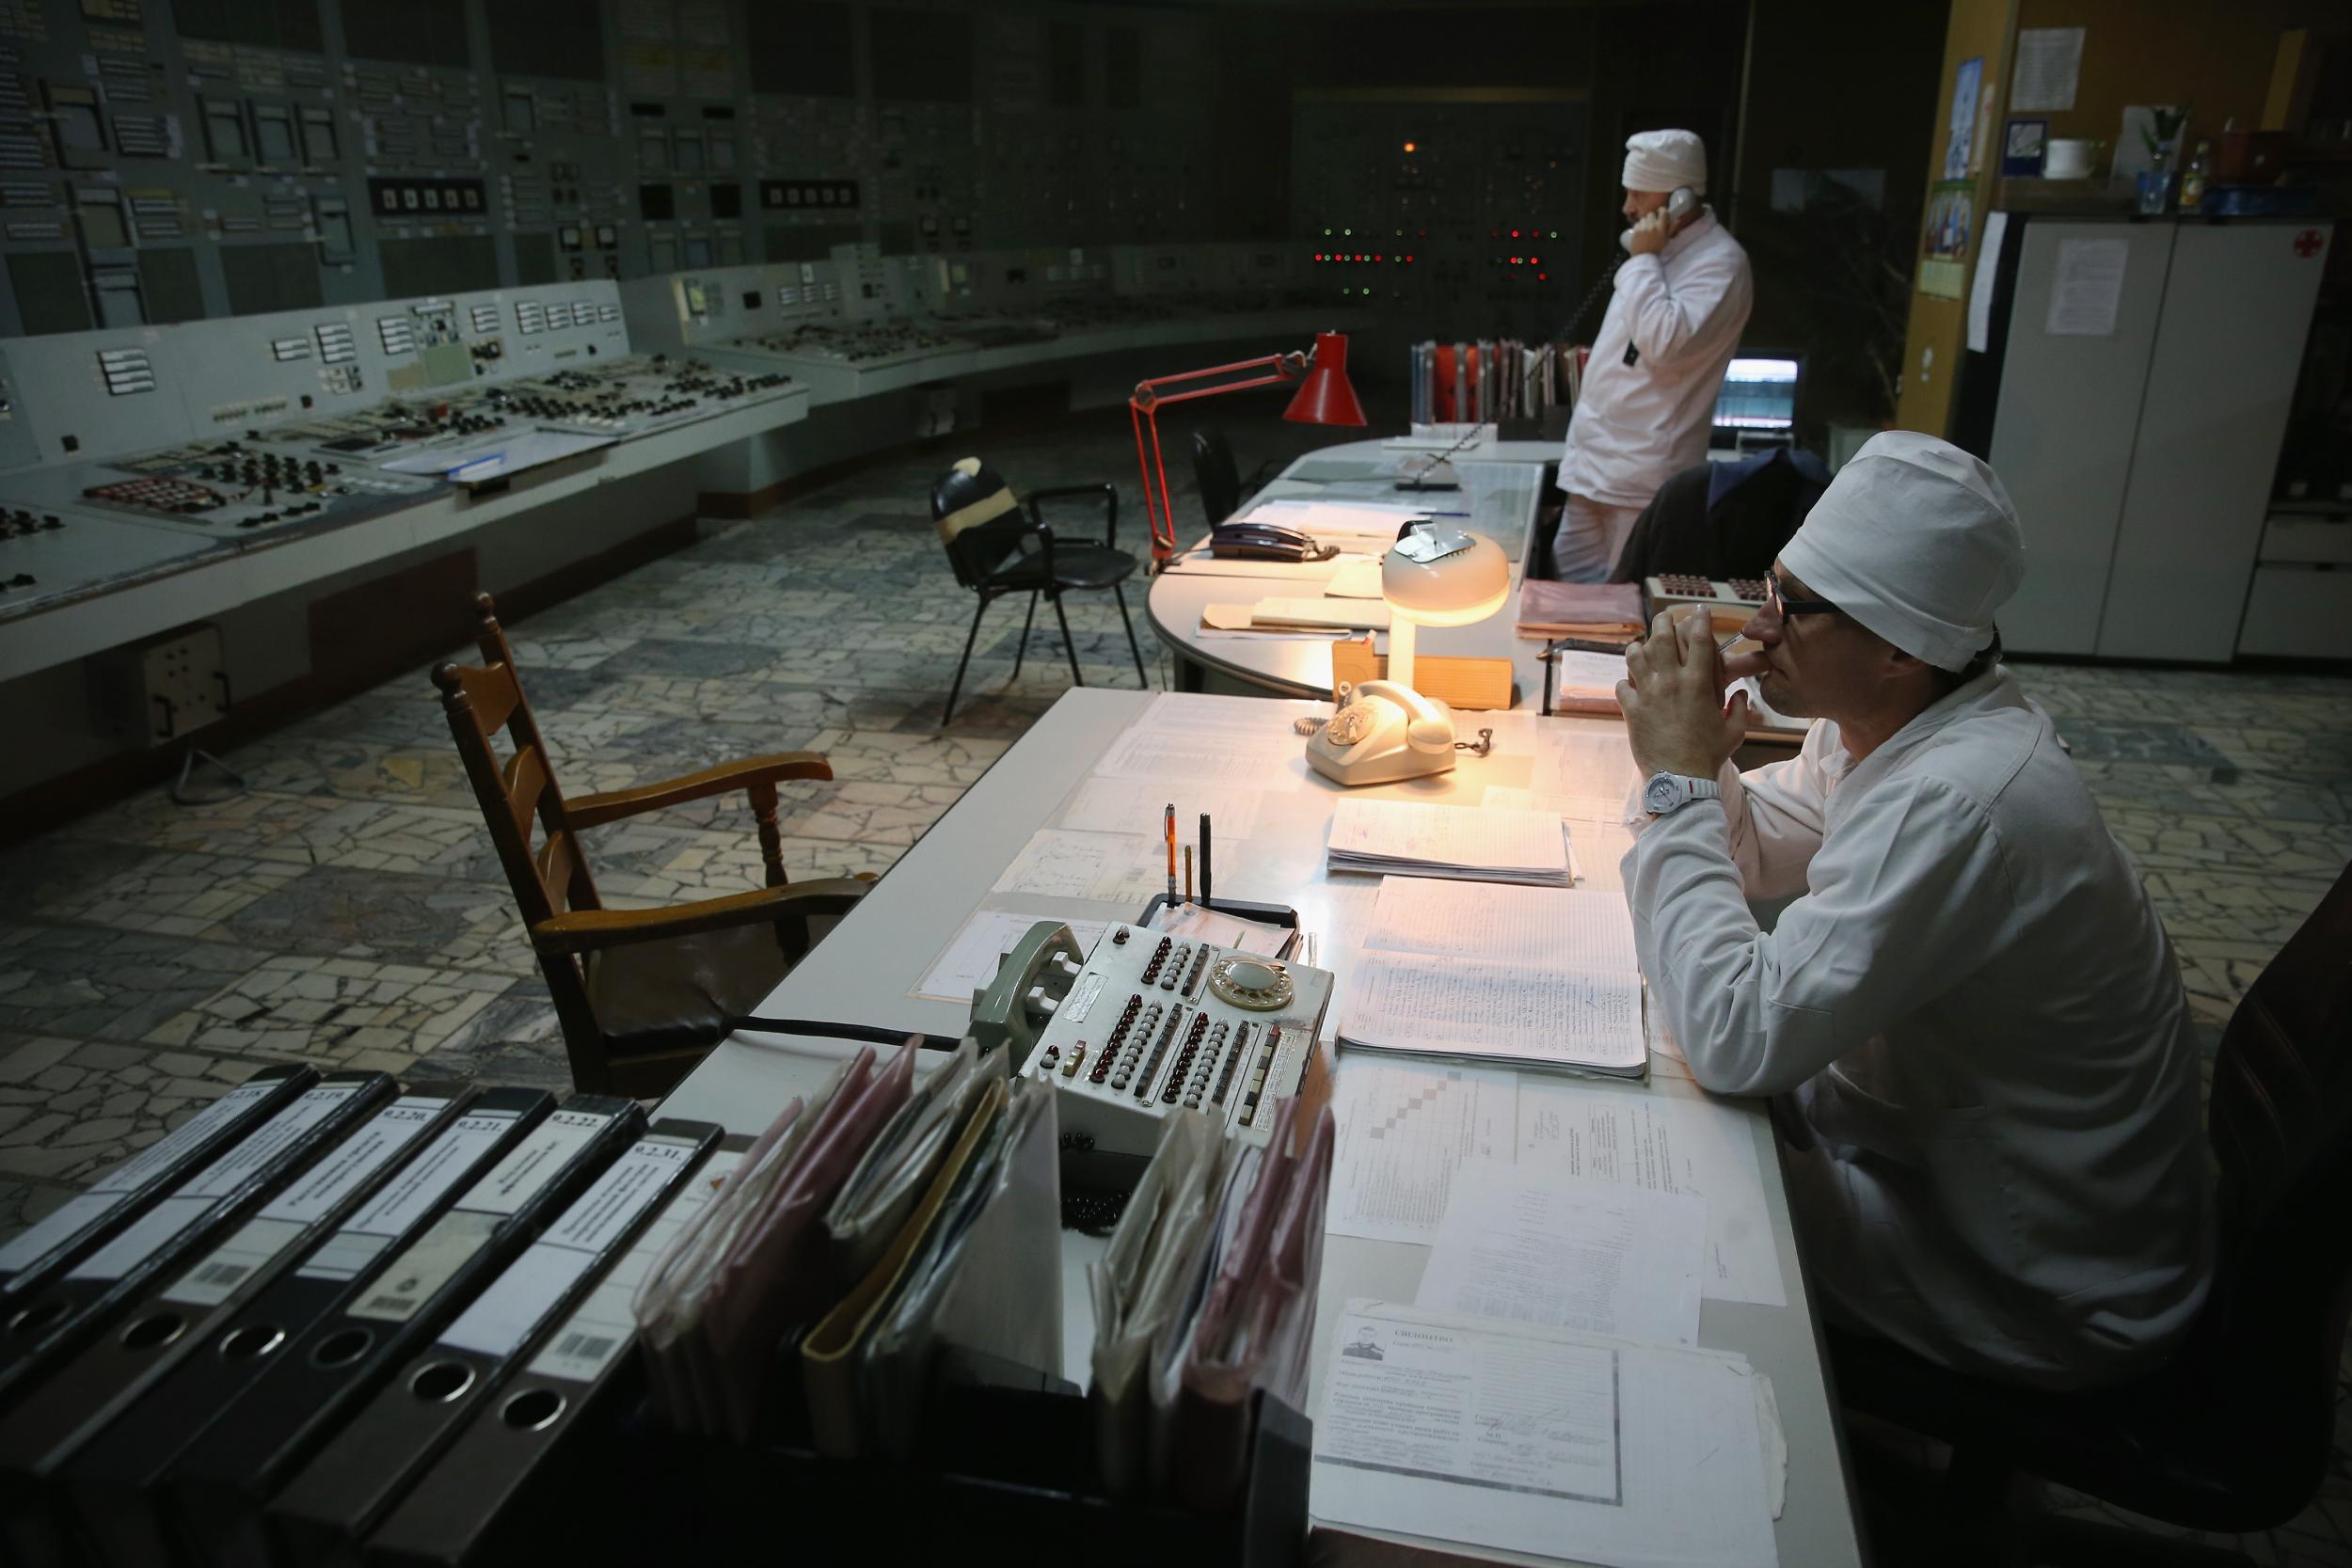 Workers sit in the control room of reactor number two inside the former Chernobyl nuclear power plant in 2015